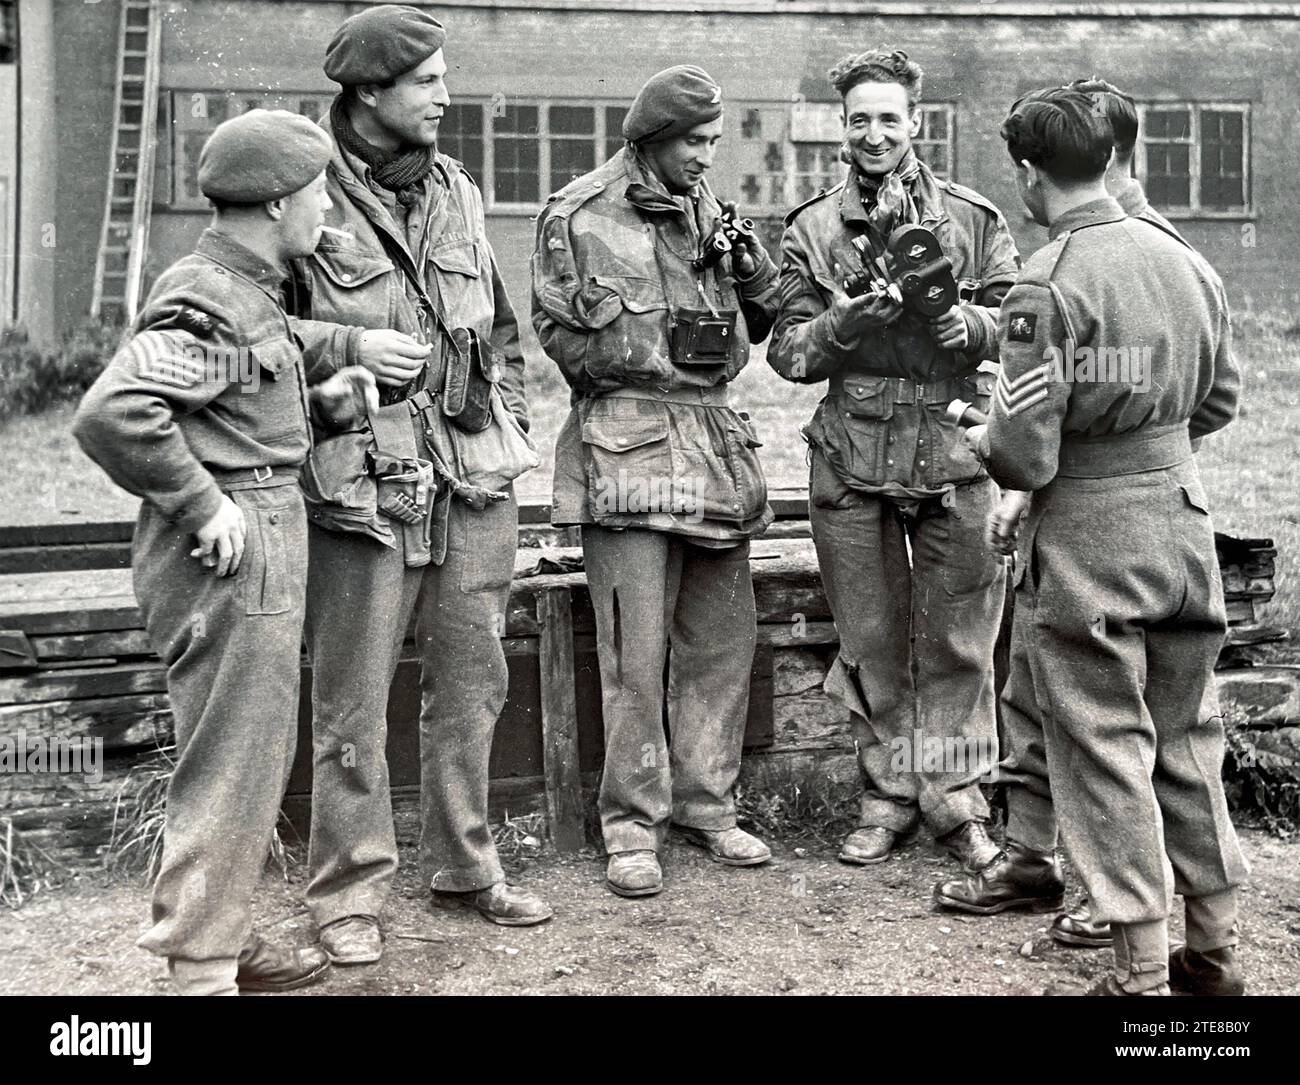 OPERATION MARKET GARDEN  September 1944. The operation was covered by three members of the Army Film and Photographic Unit  seen here facing camera back at AFPU HQ at Pinewood Studios on 28 September.  From left: Sgts  D.M.Smith, G. Walker, C.M.Lewis. Stock Photo